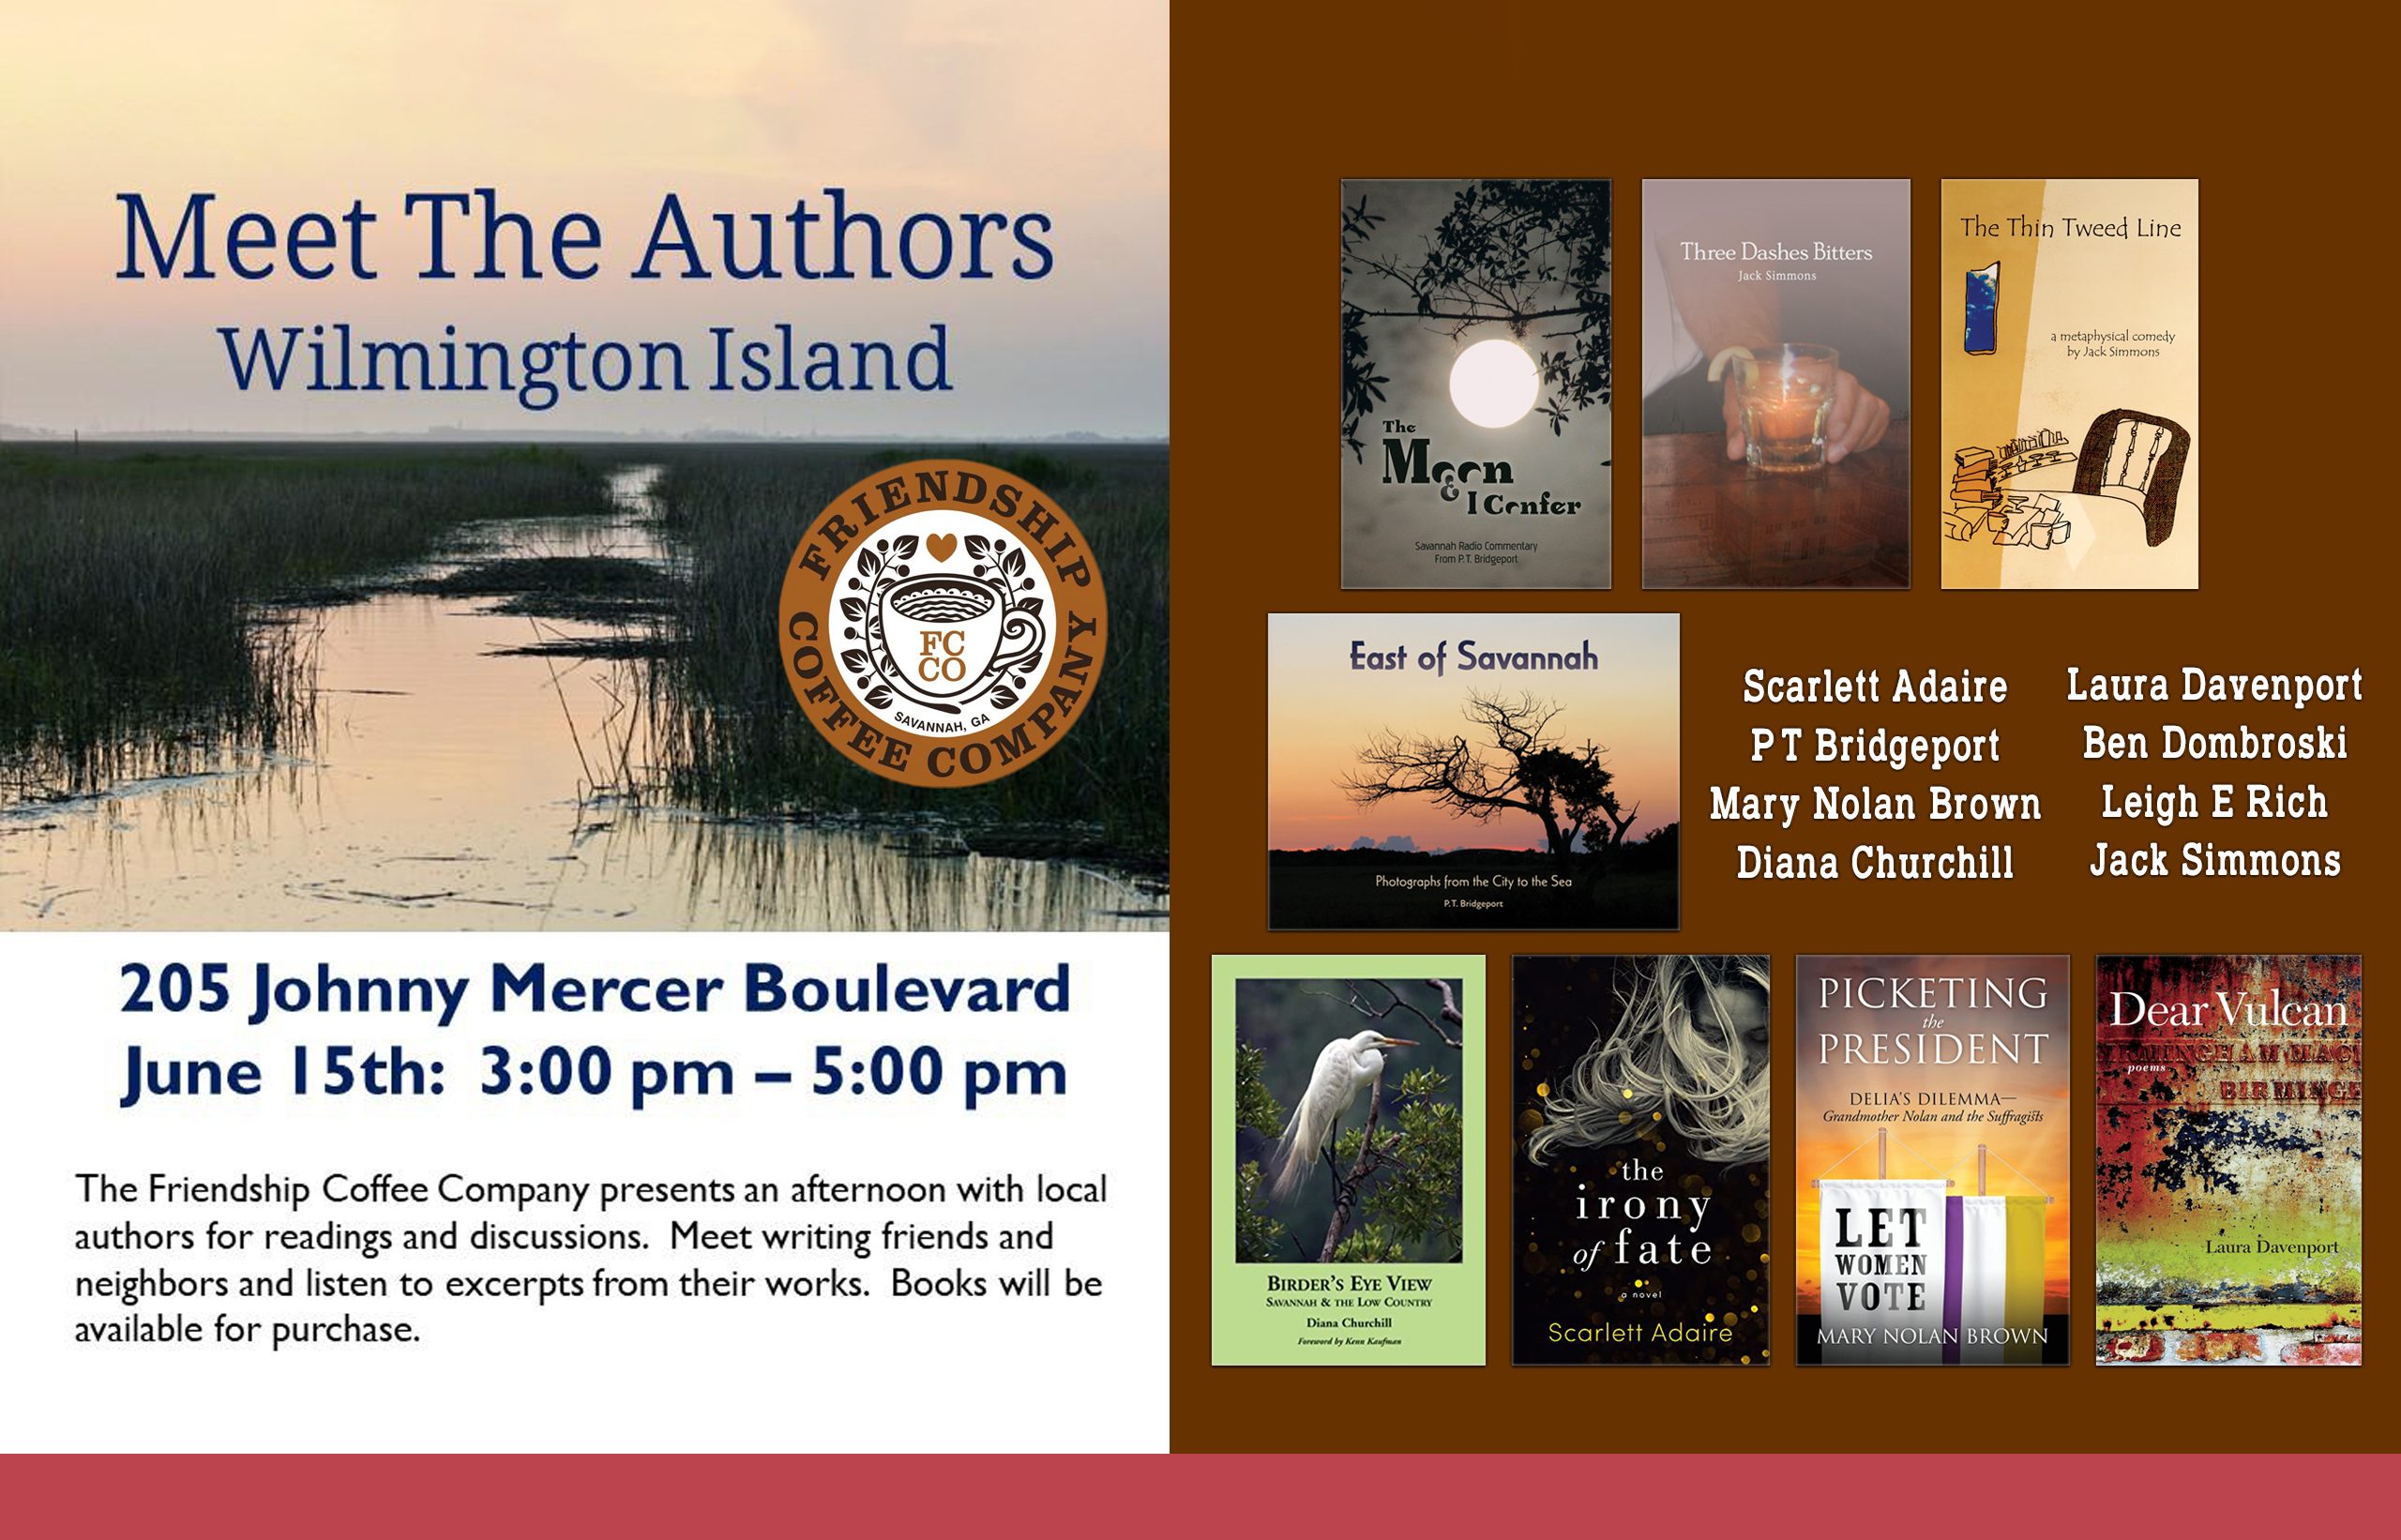 Book covers for a "Meet the Authors" event at Friendship Coffee Company (with its logo of a coffee cup surrounded by leaves).